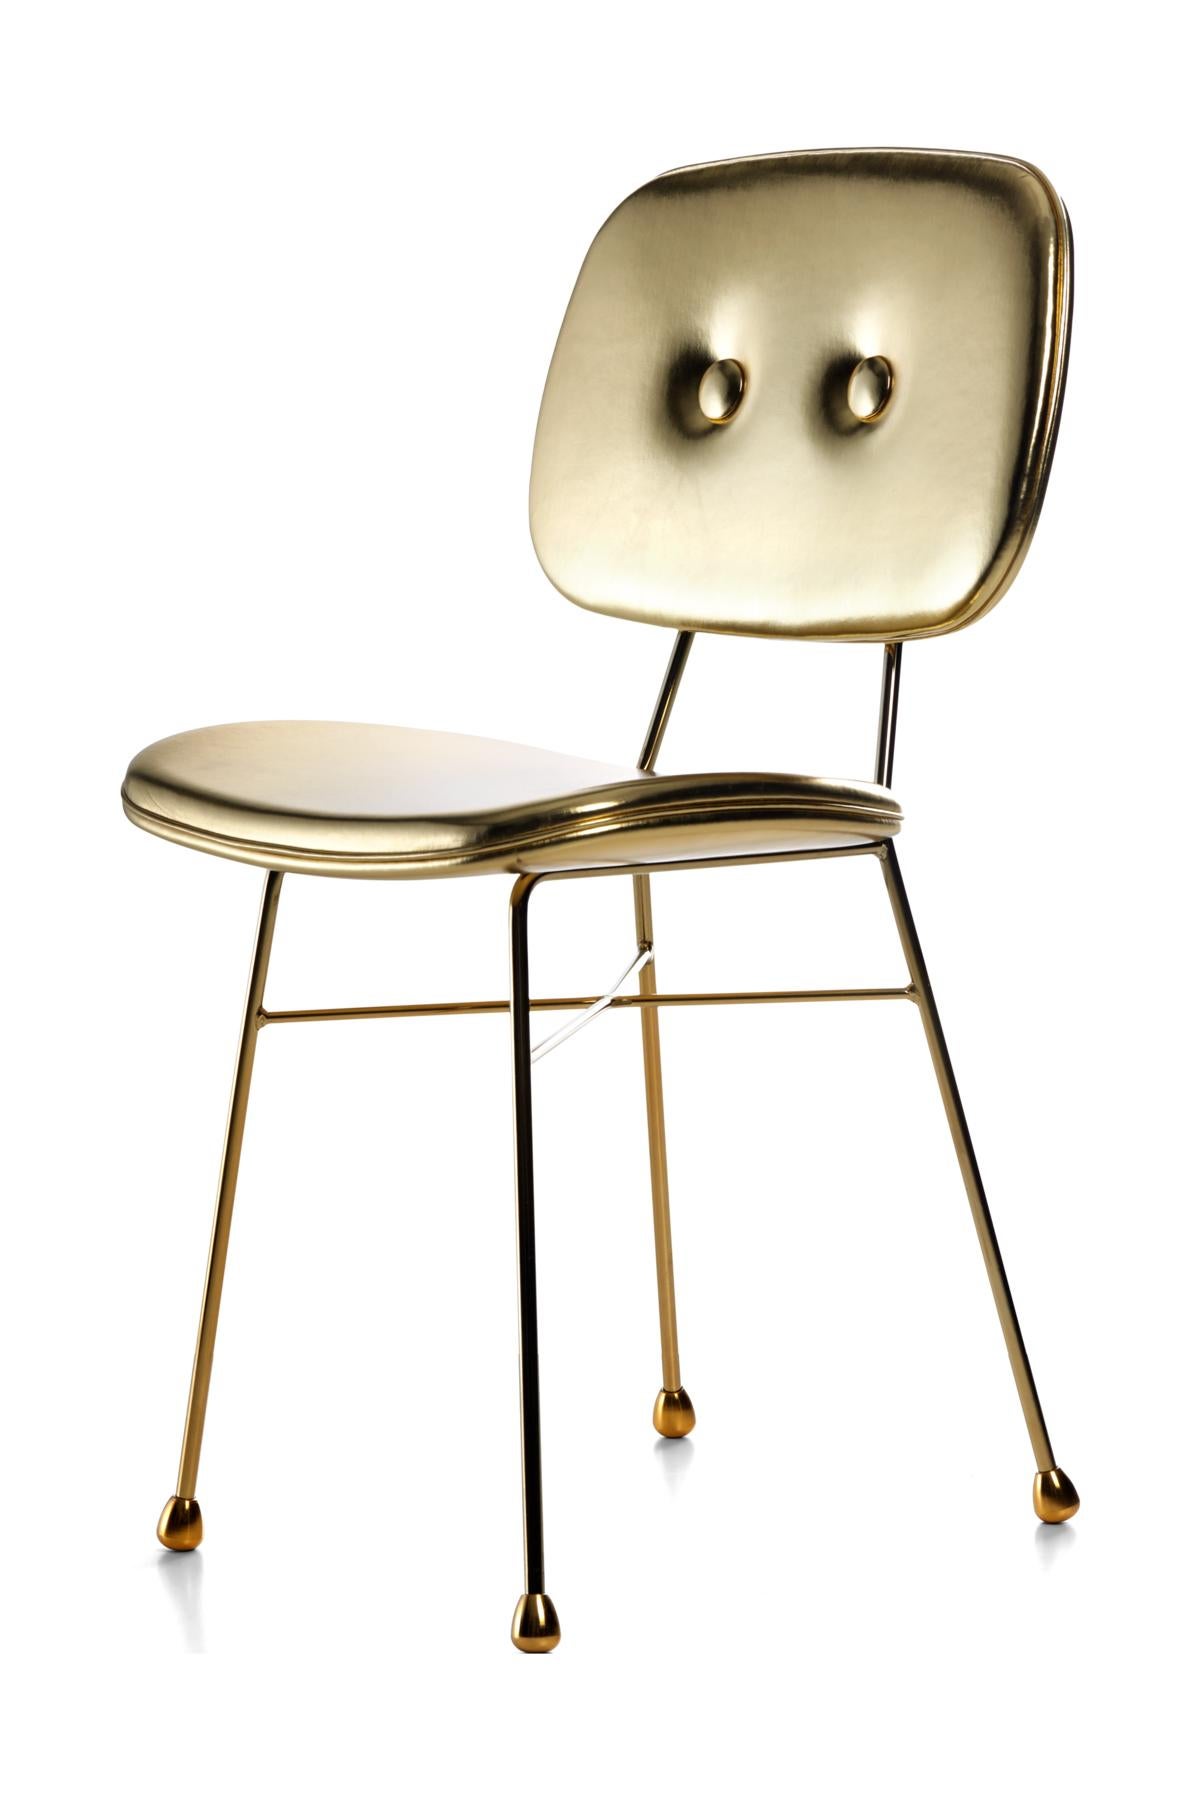 Under a mysterious magic spell, a retro-looking school chair is dipped in enchanted golden nectar, which washes away its austerity and crows it with a shiny aureole. Isn't this a typical school-time wish, while looking out of the window and hoping